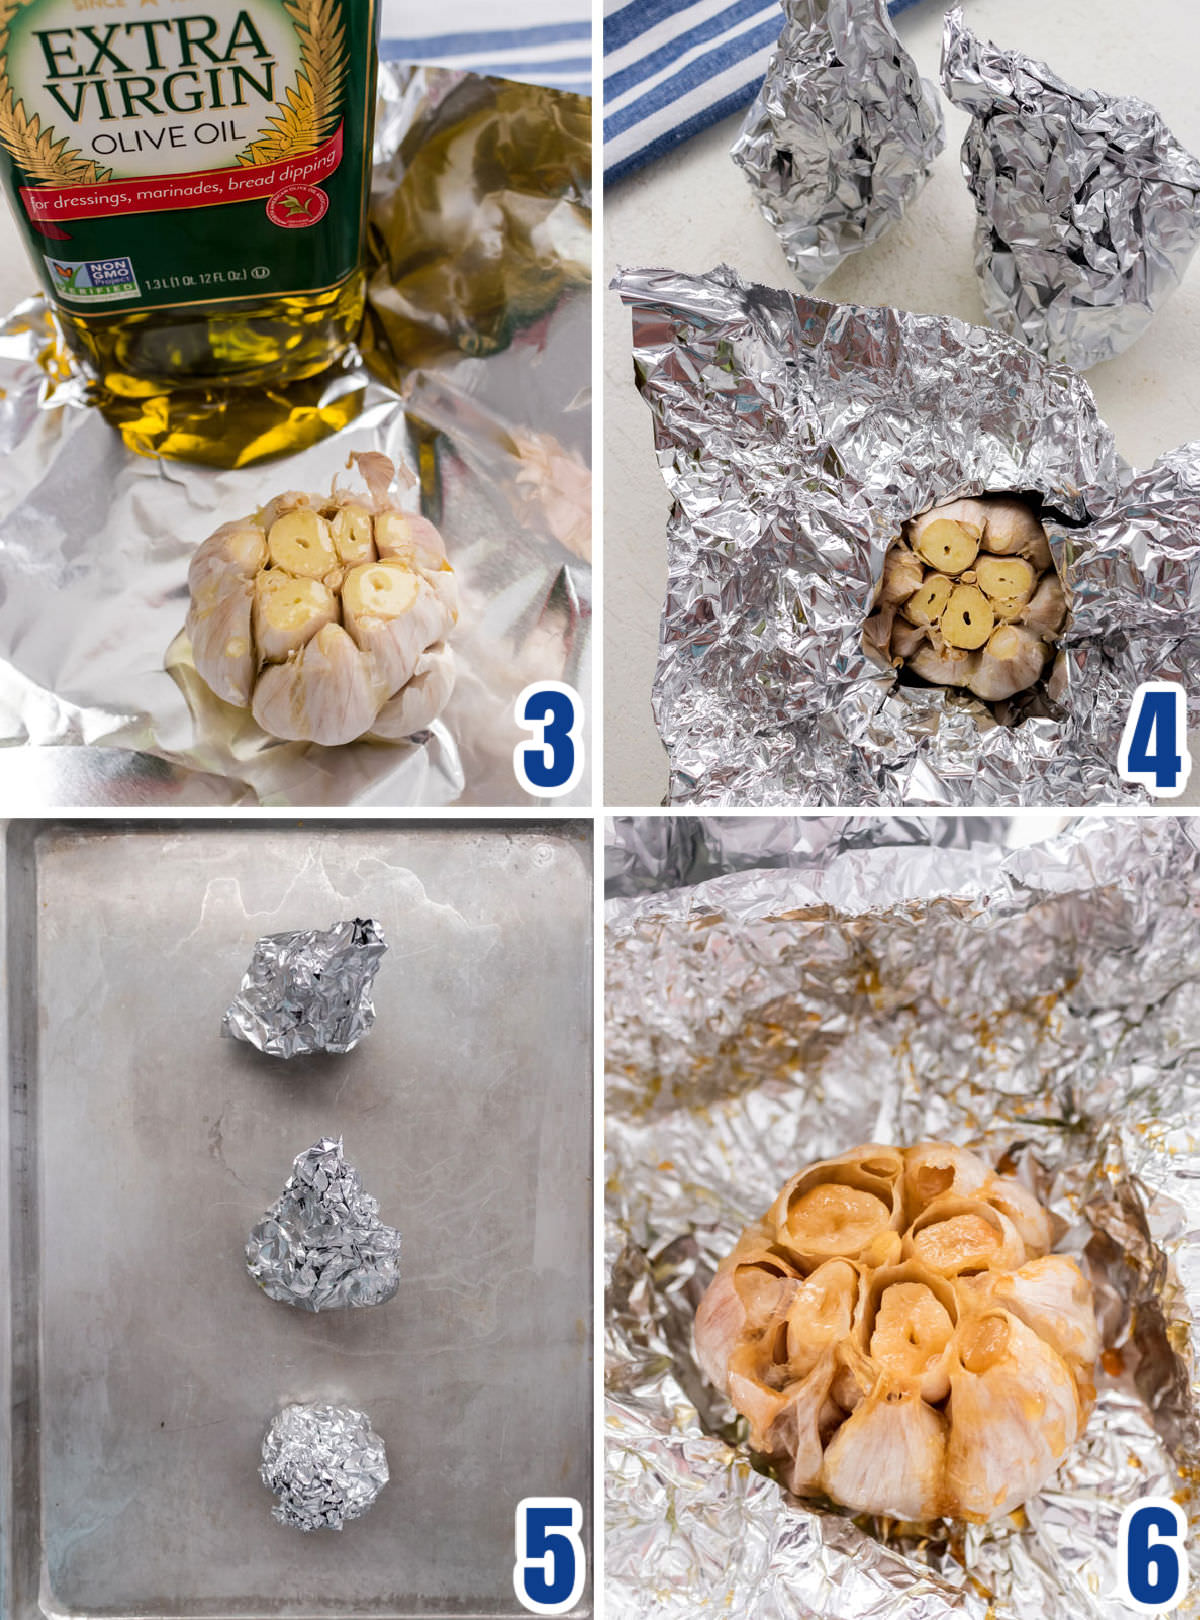 Collage image showing the steps for roasting the head of garlic in the oven.